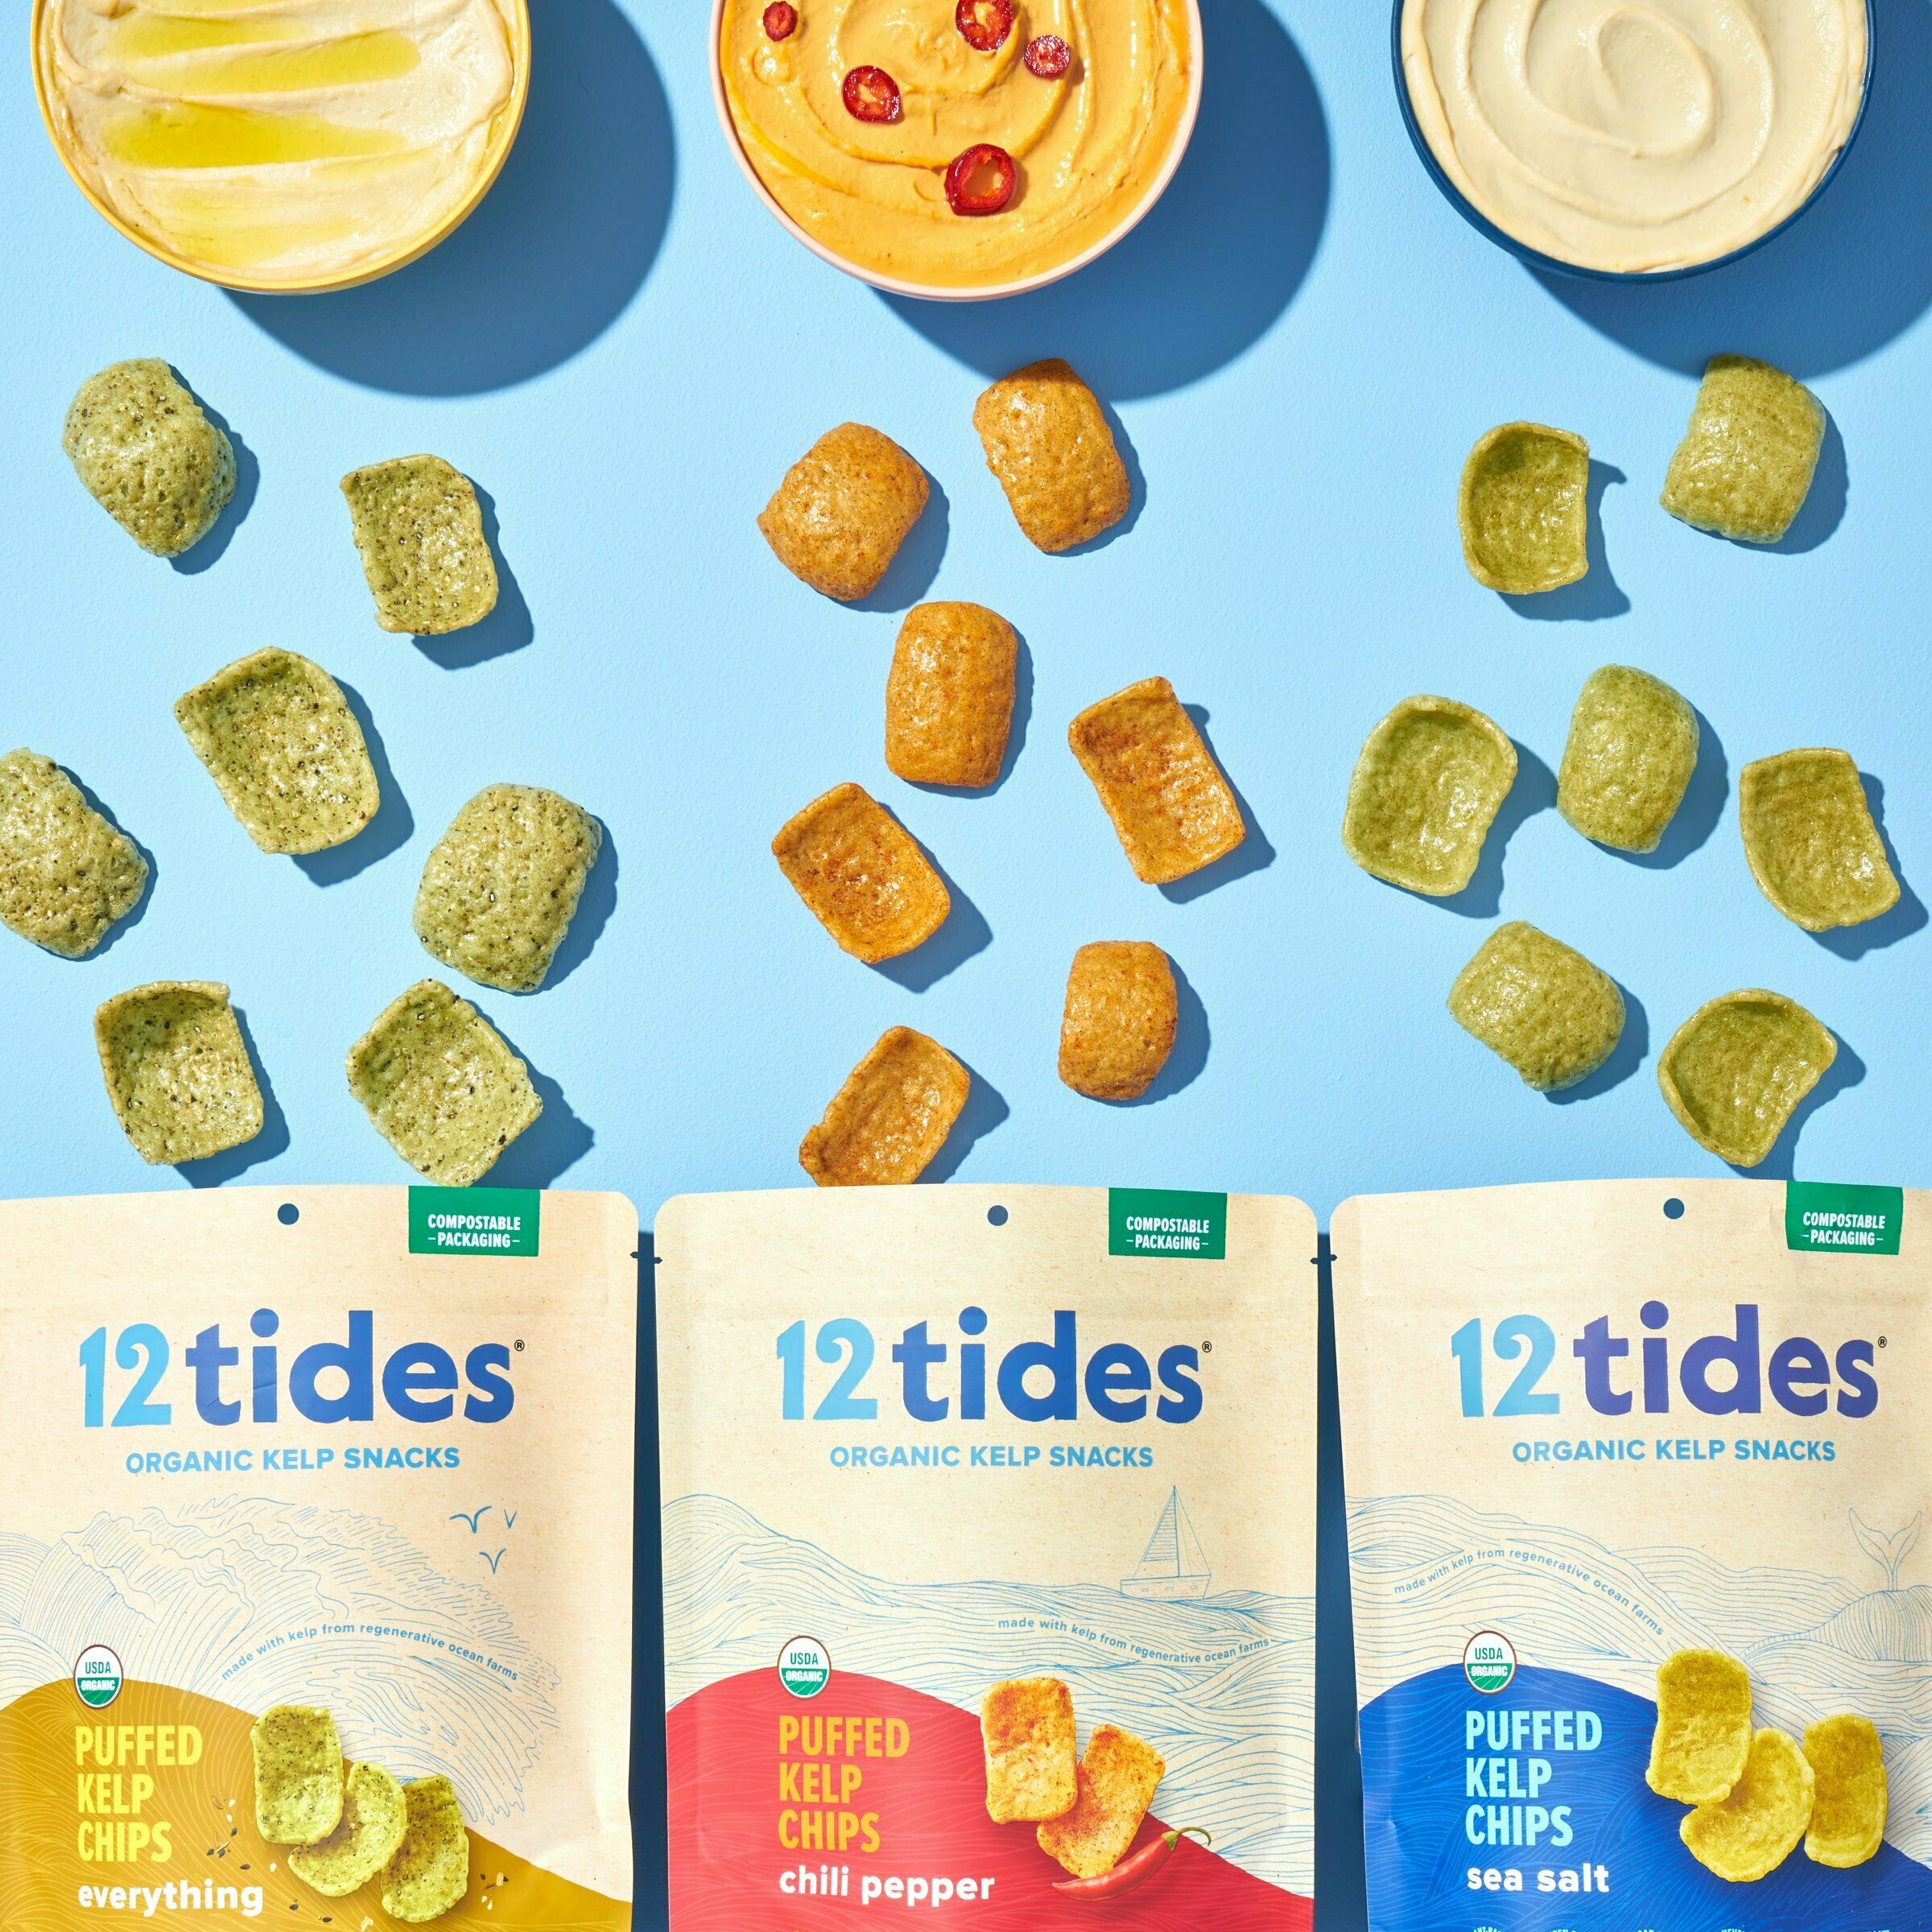 All flavors of 12 Tides Kelp Chips spilling out from each bag towards bowls of hummus